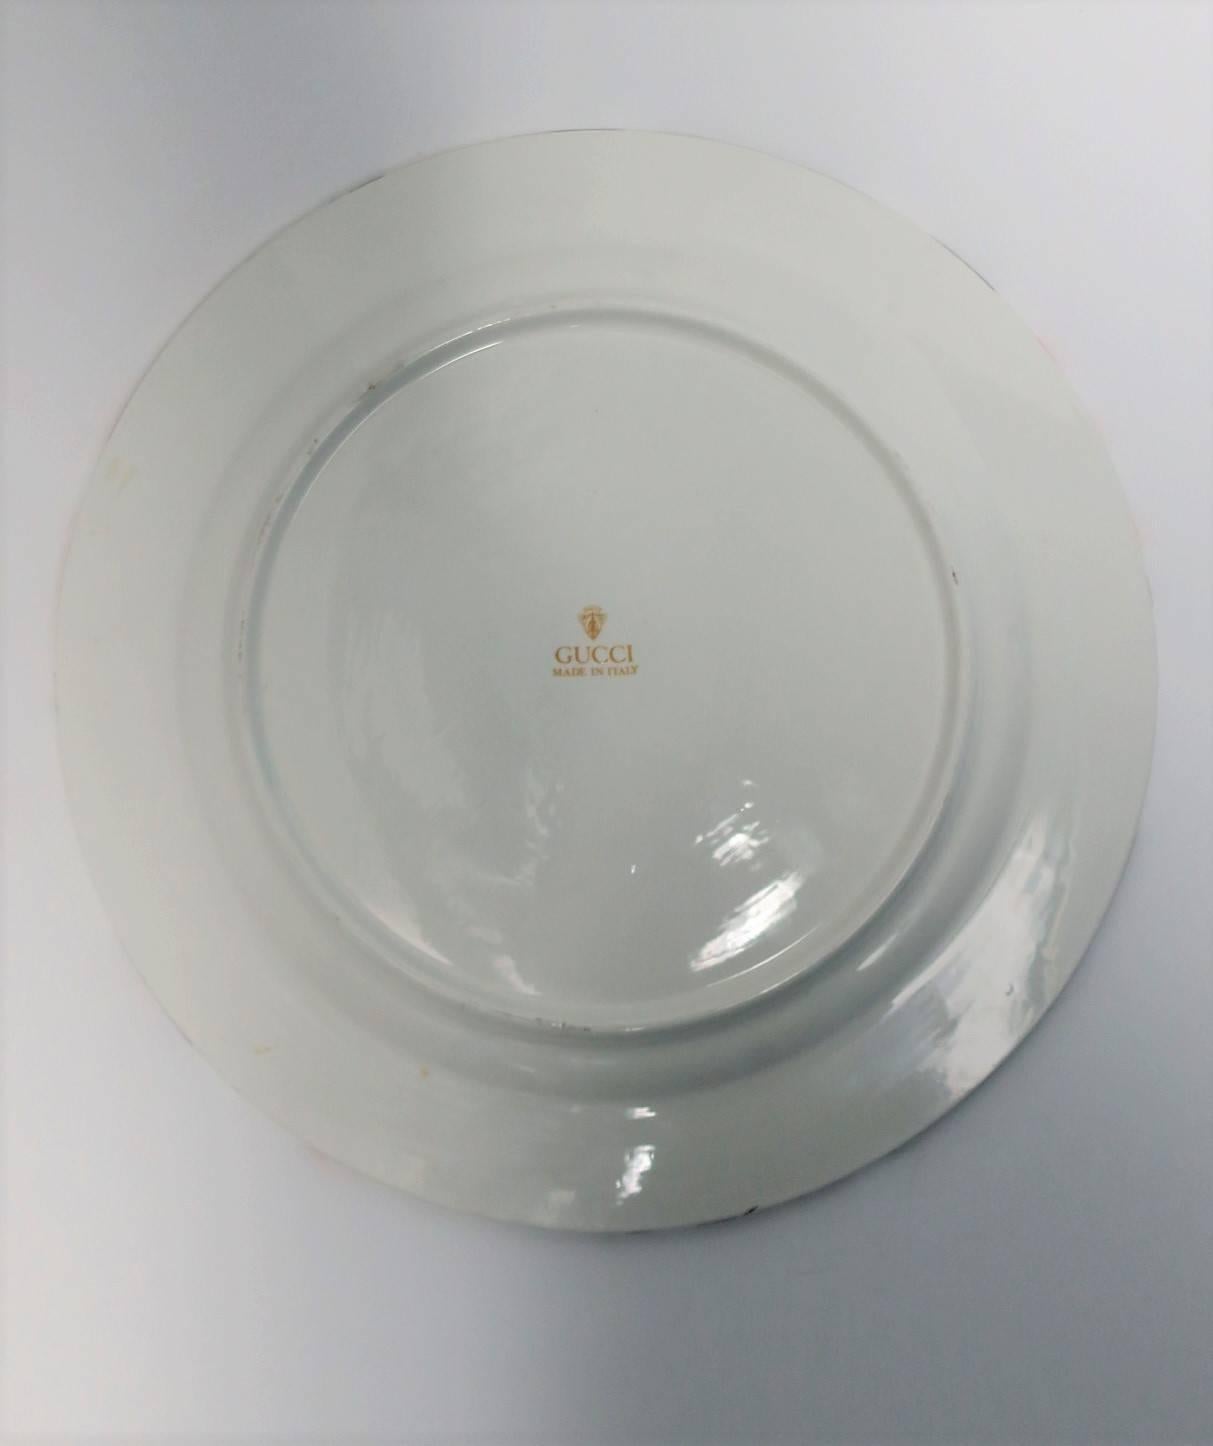 Italian Gucci Plate in Black, White, and Red